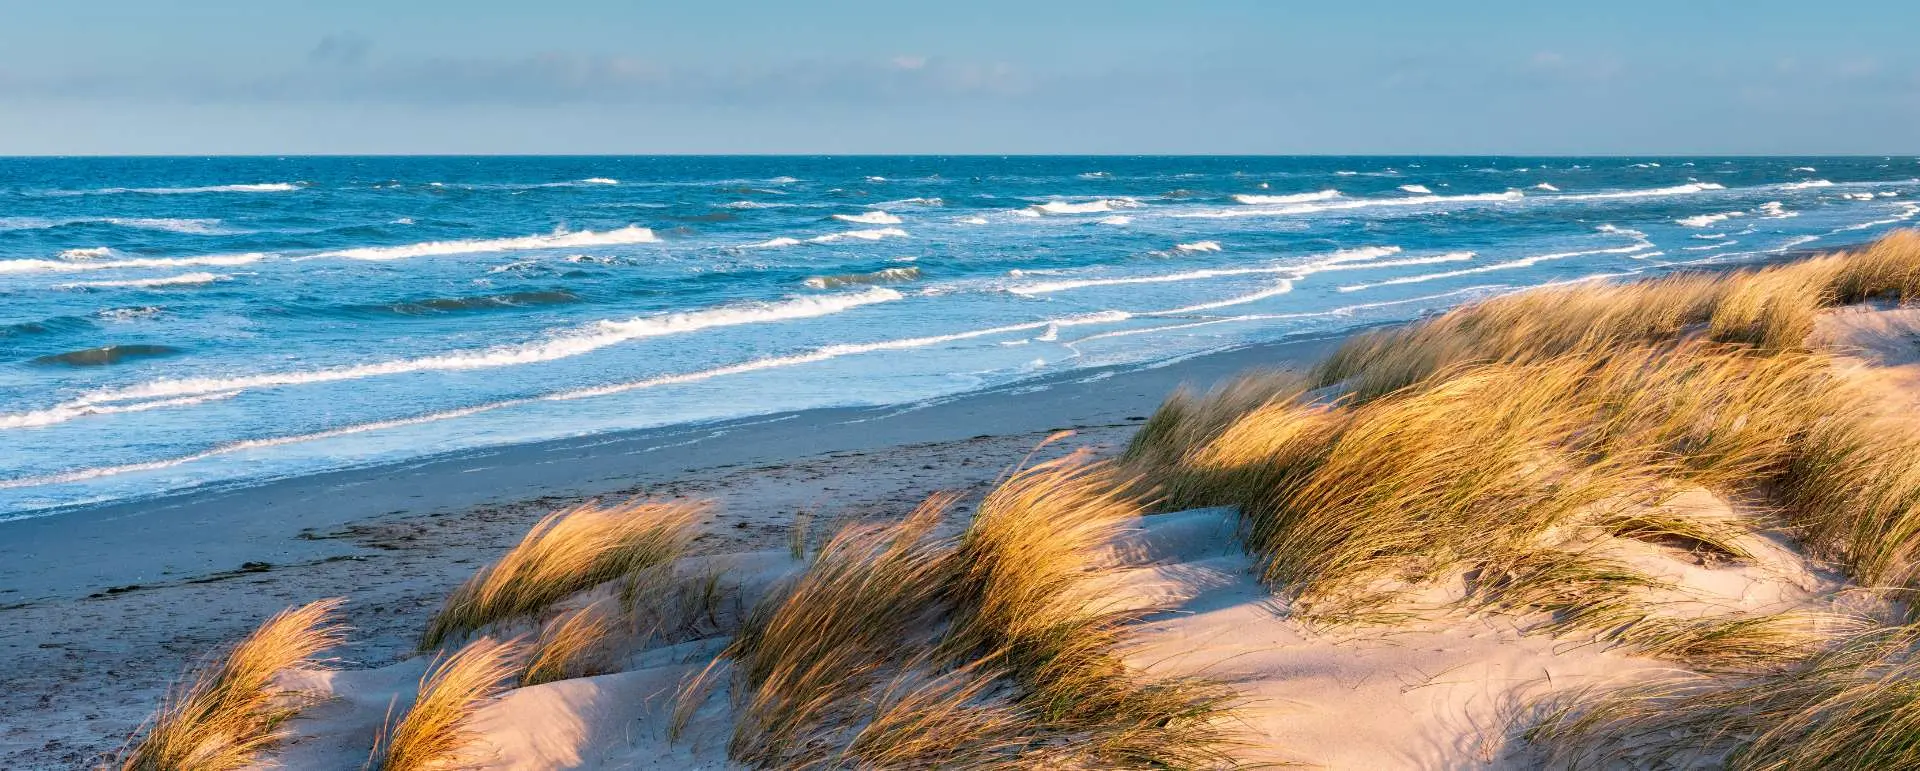 Fischland-Darß-Zingst - the destination for hotels with group offers